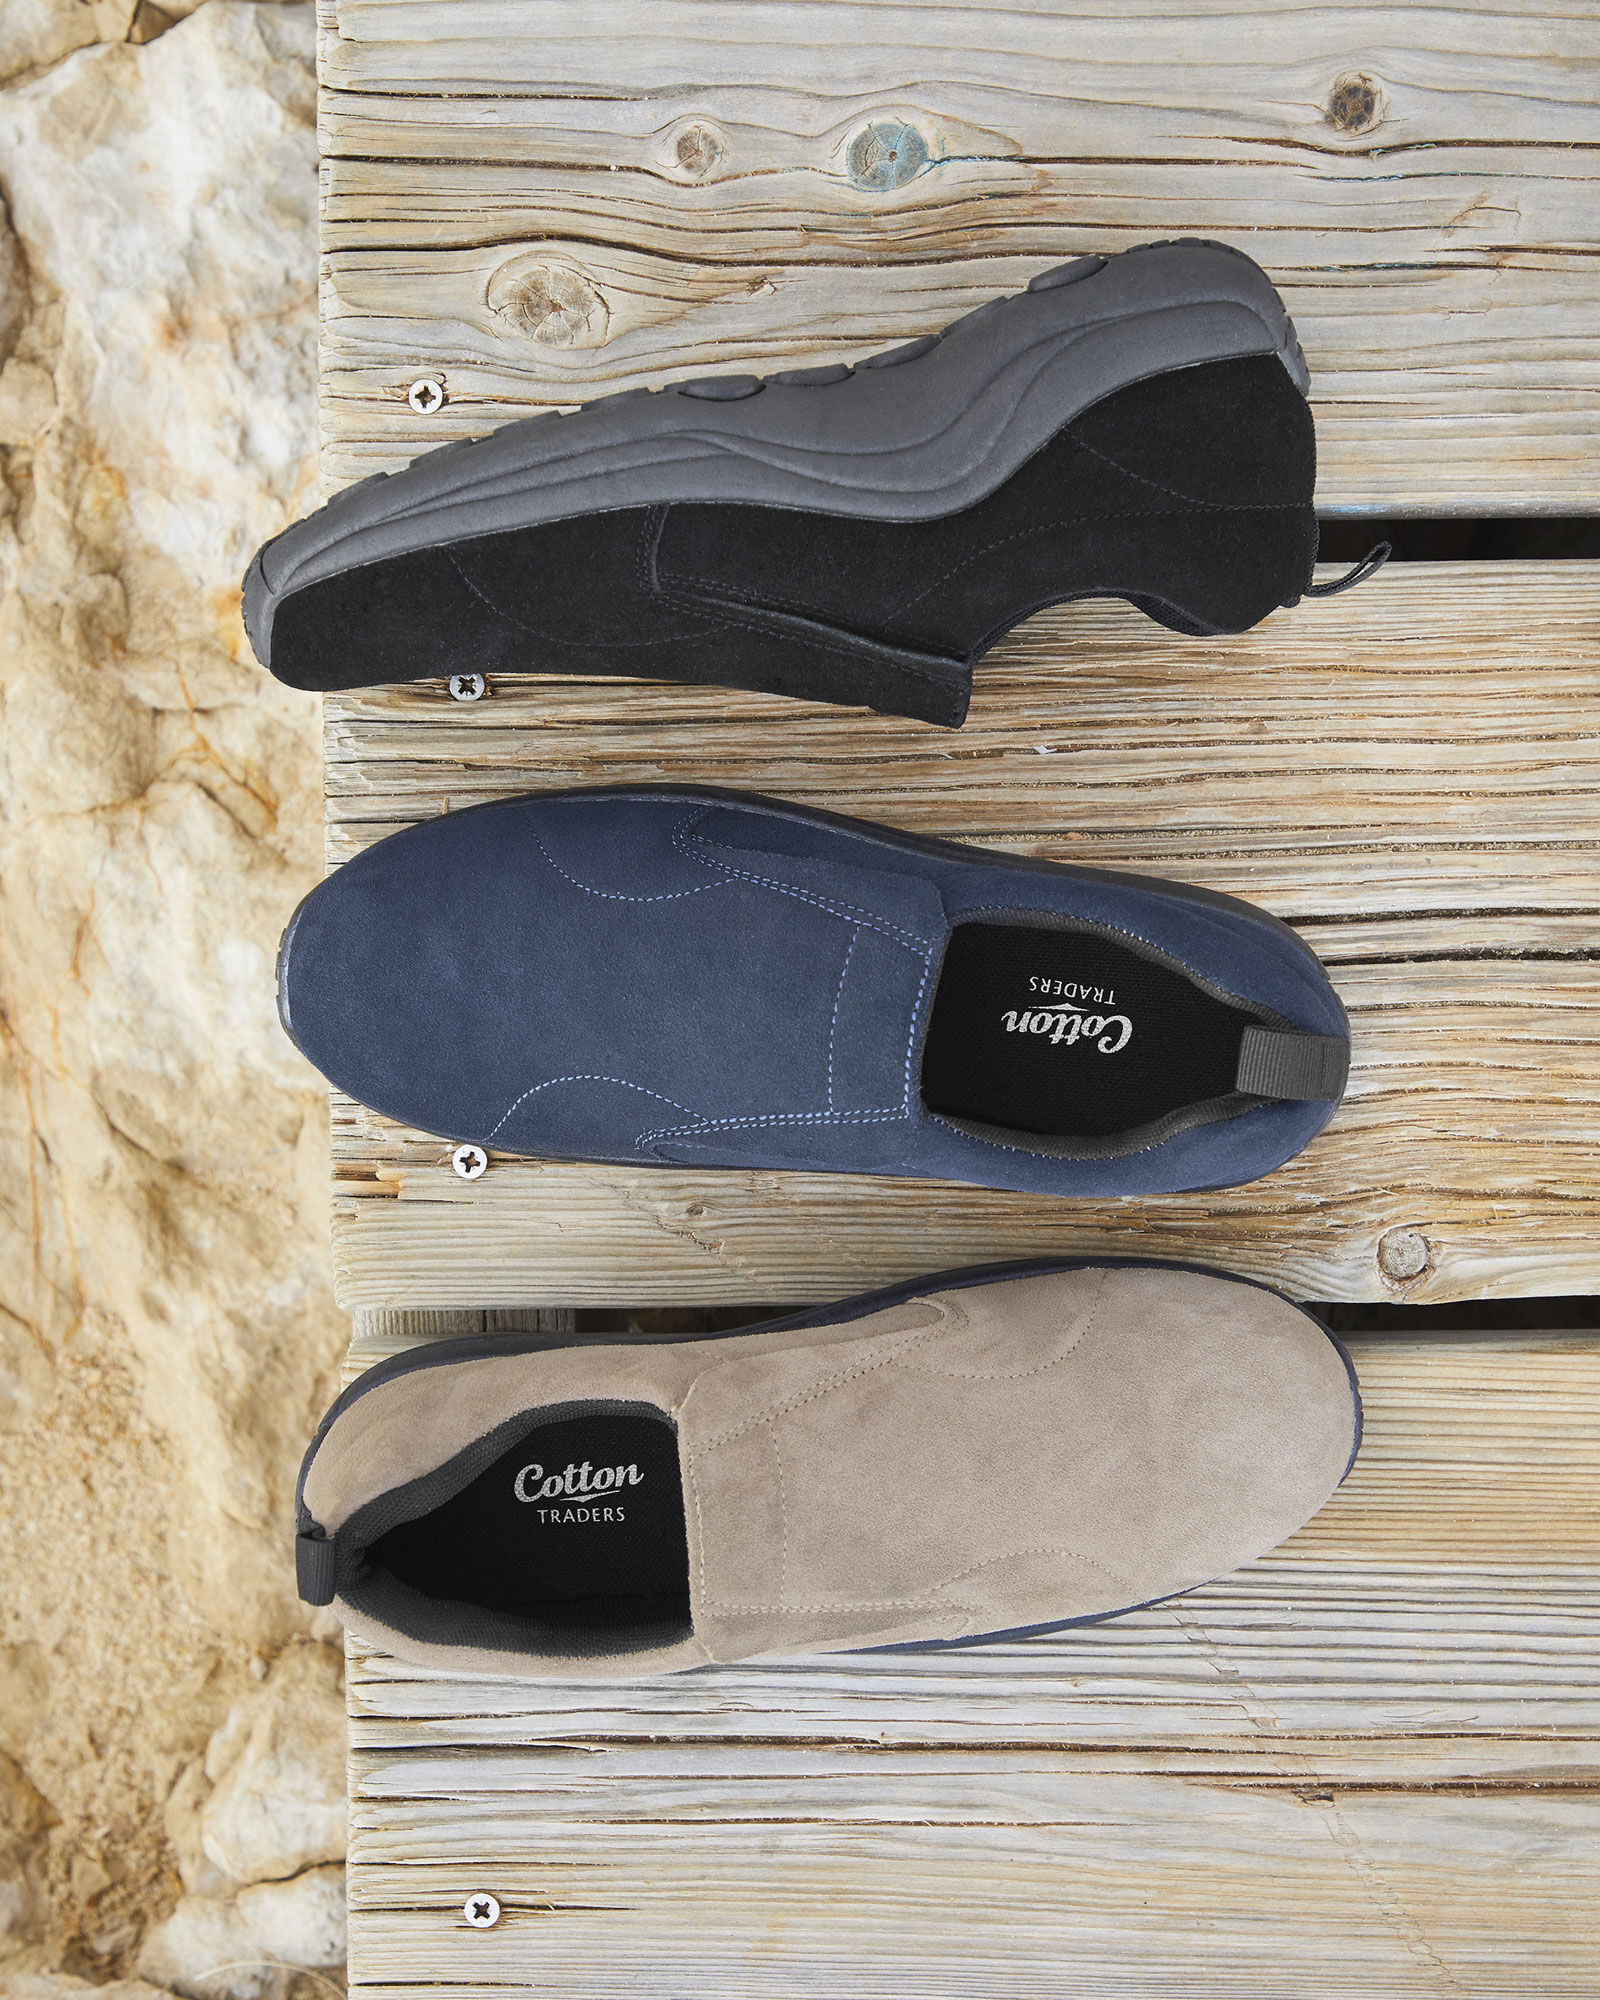 Lightweight Suede Slip-Ons at Cotton 